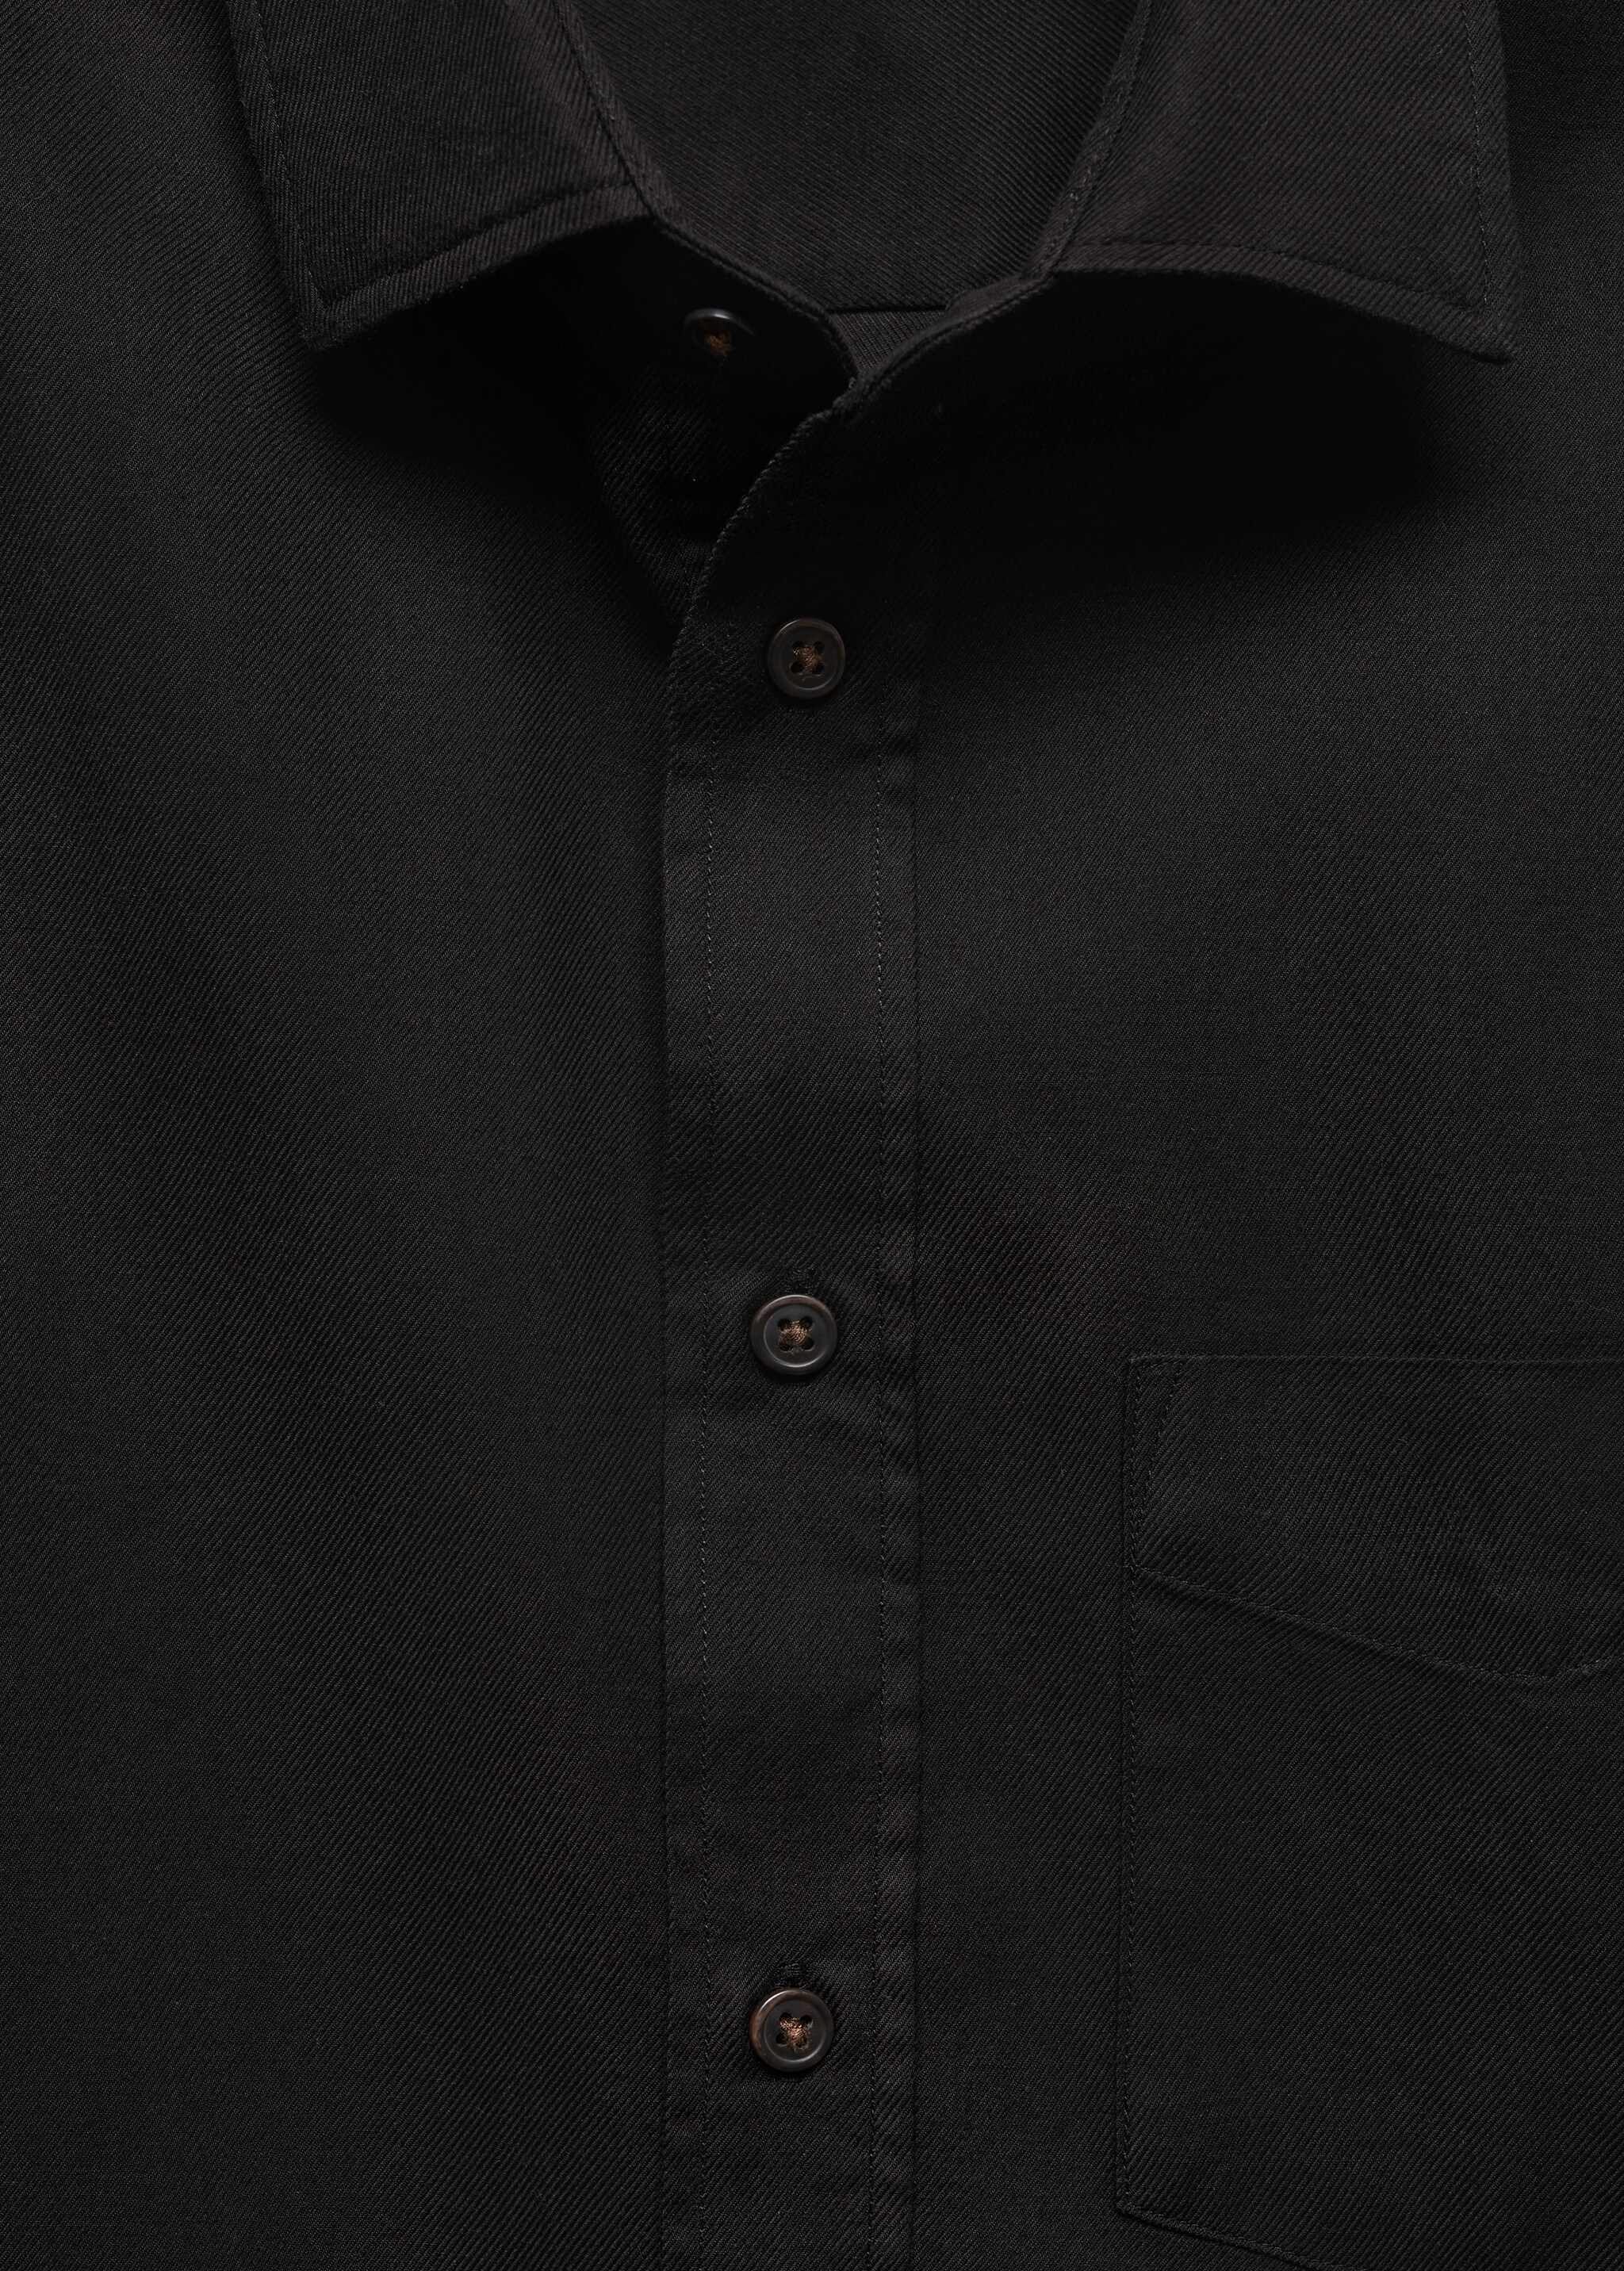 Brushed cotton twill shirt - Details of the article 8